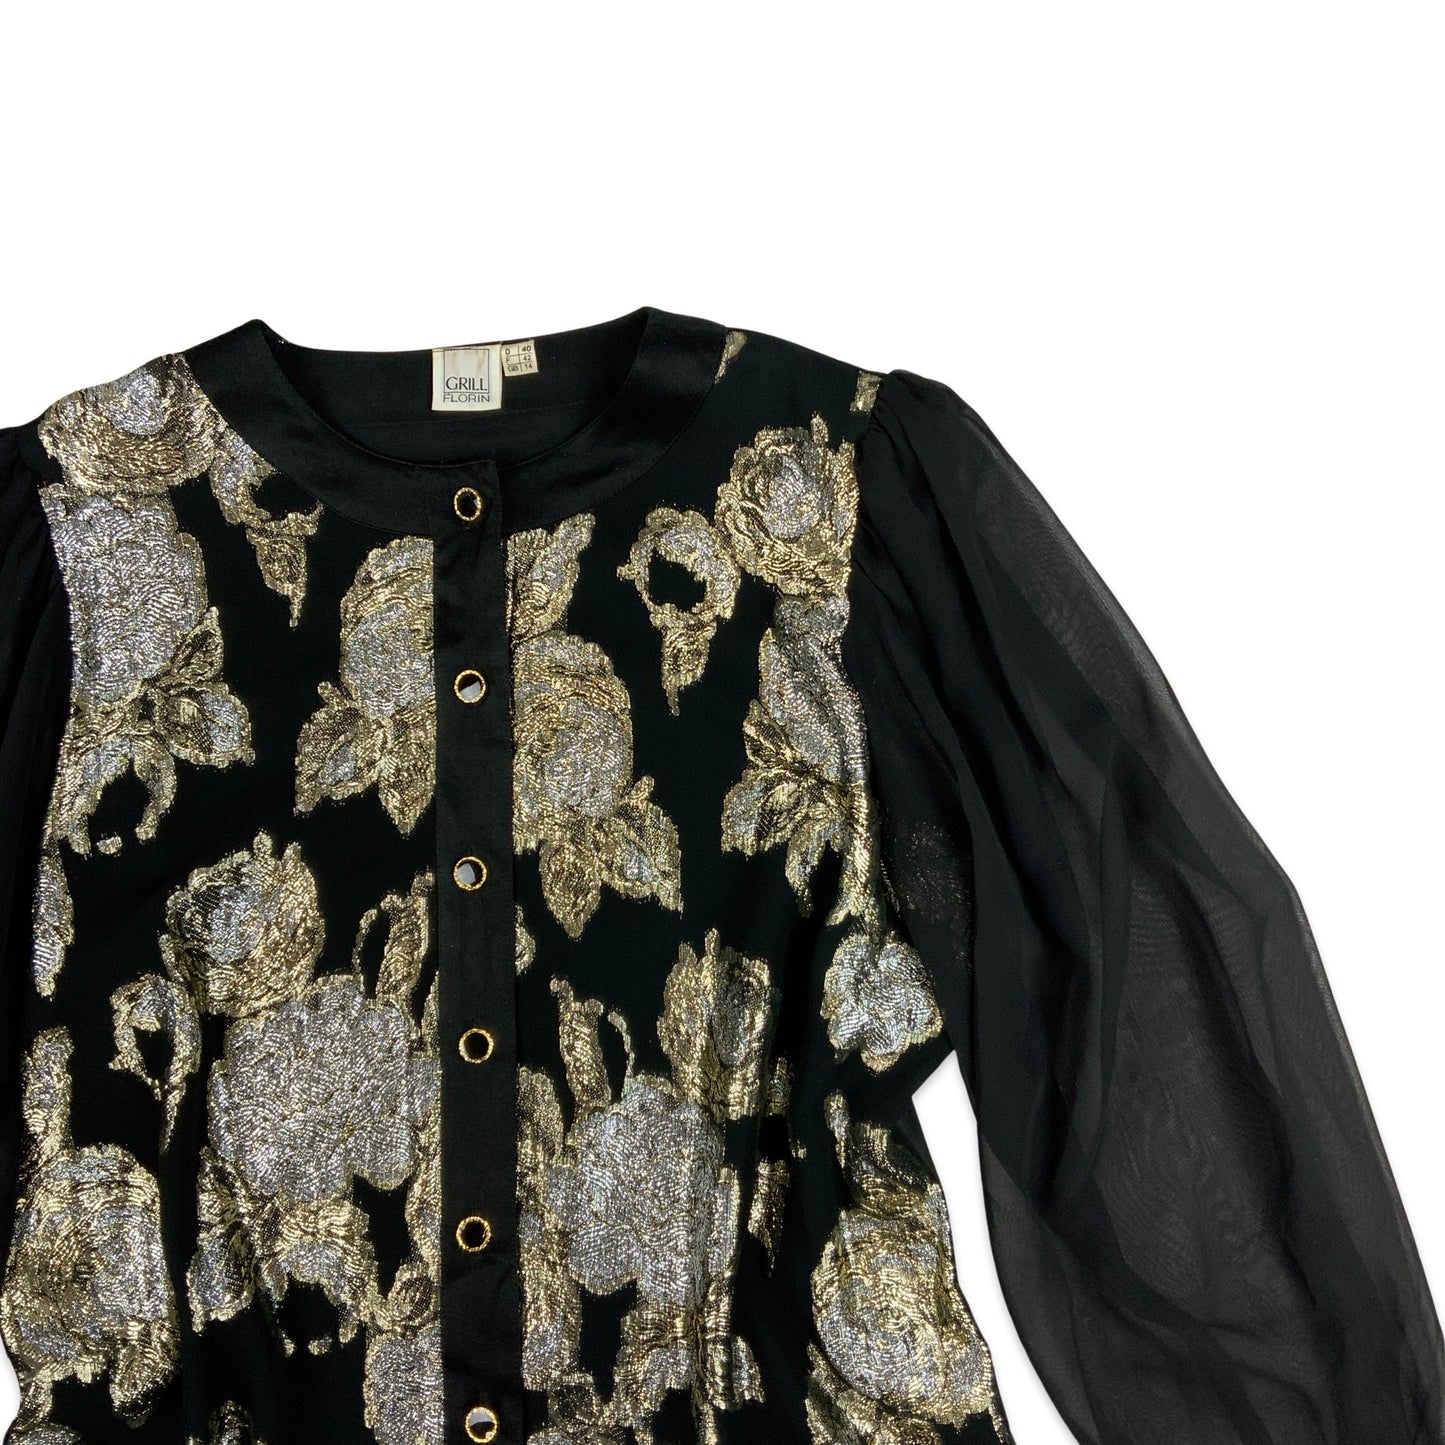 Vintage Black Silver and Gold Floral Lurex Button-up Blouse 14 16 18